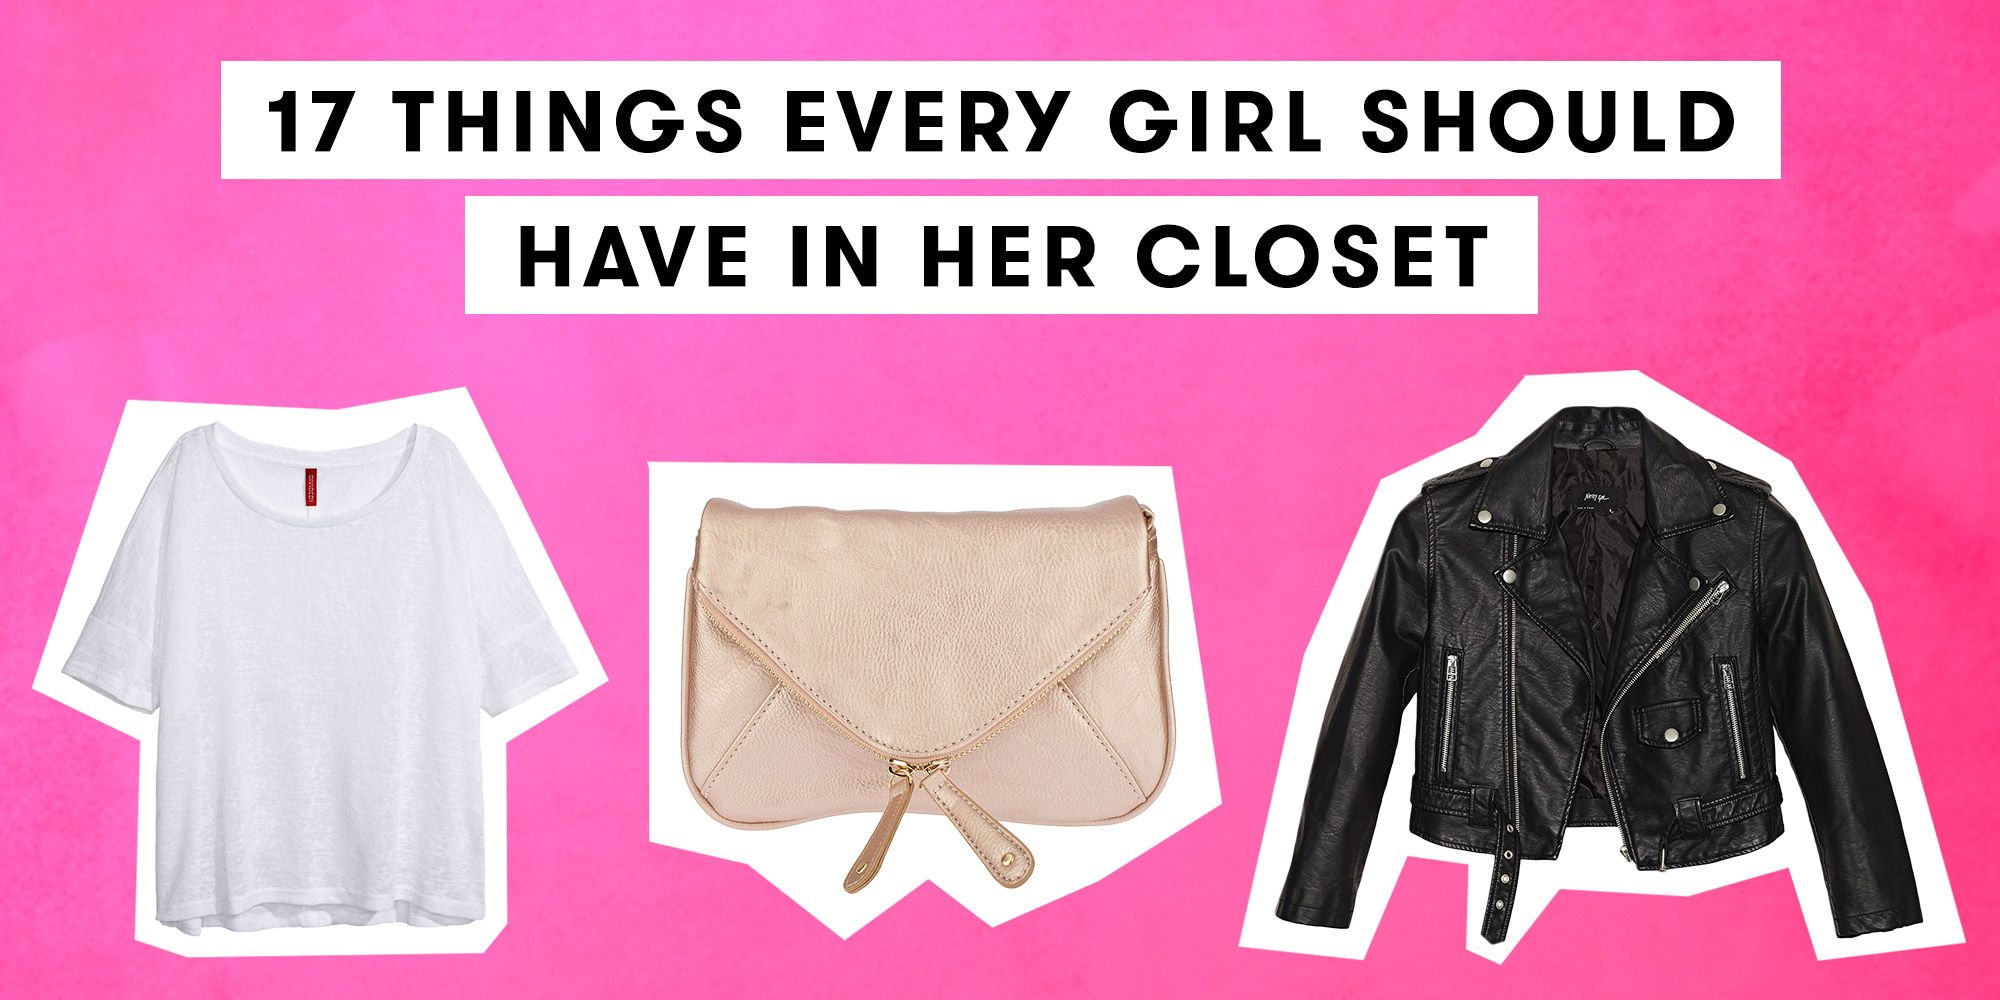 How to Help Your Teen Daughter Build Her Wardrobe - Our Tips For